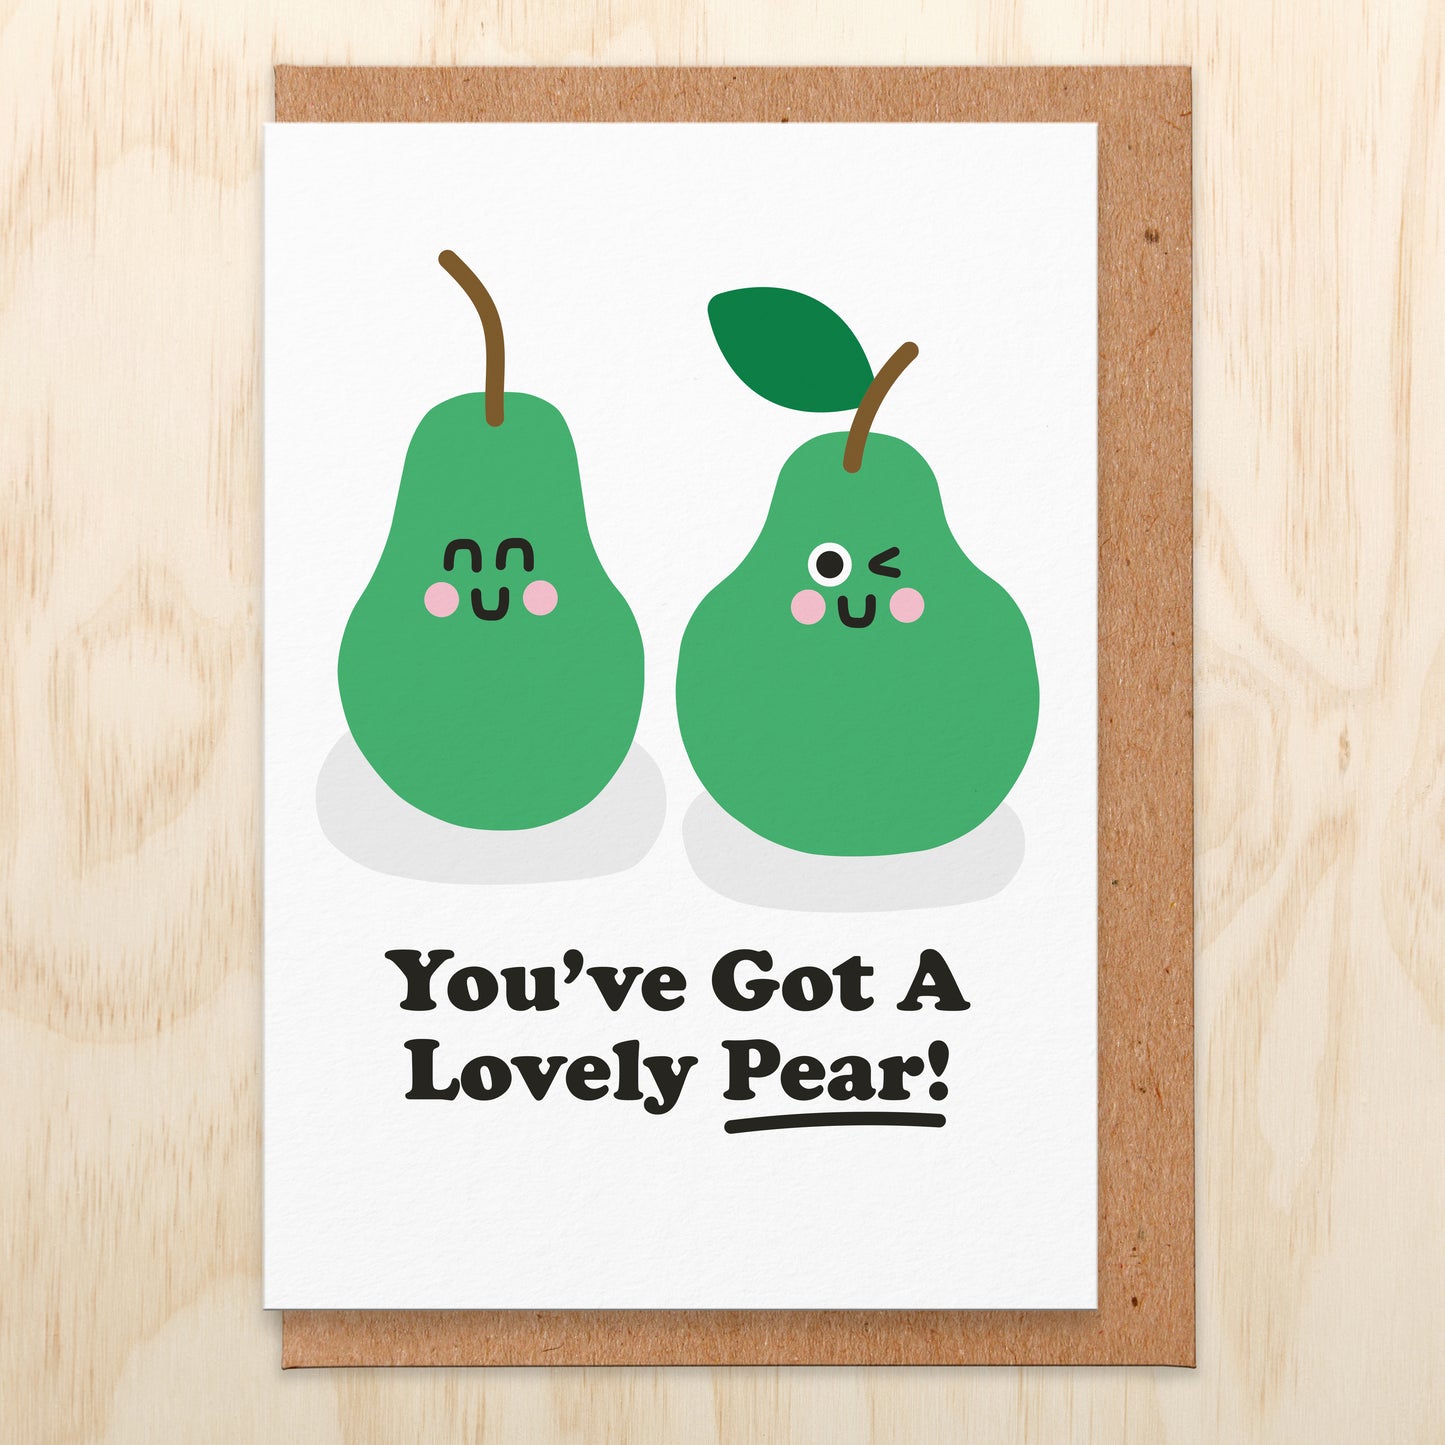 Love card with an illustration of 2 pears, one is smiling and one is winking. The text reads you've got a lovely pear!